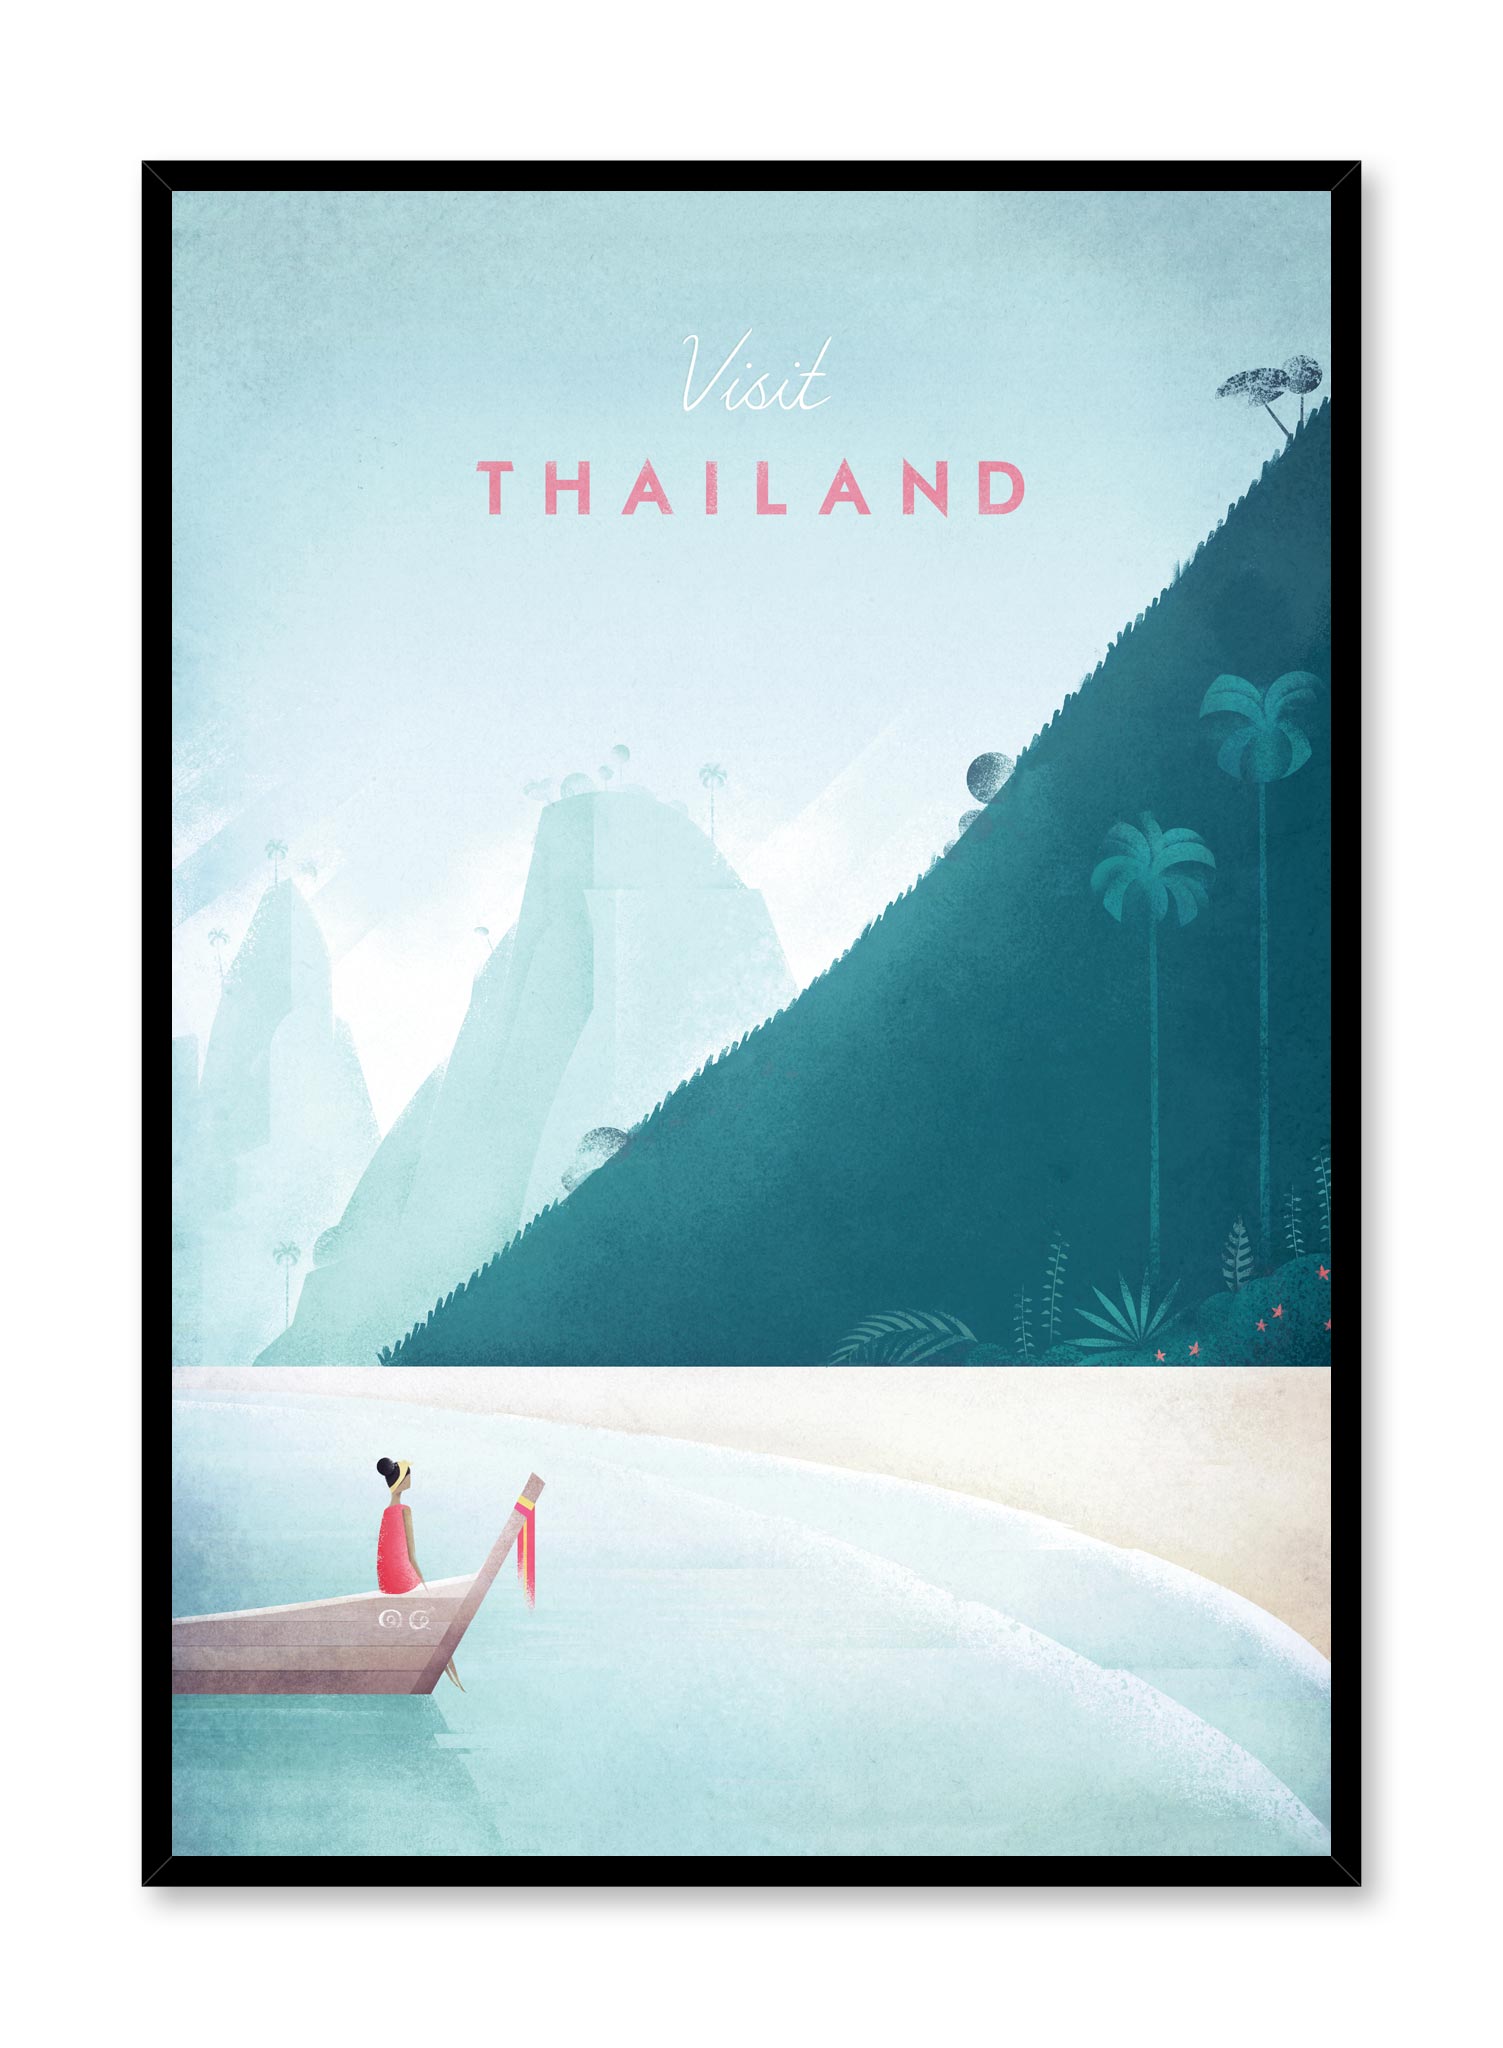 Modern minimalist travel poster by Opposite Wall with illustration of Thailand